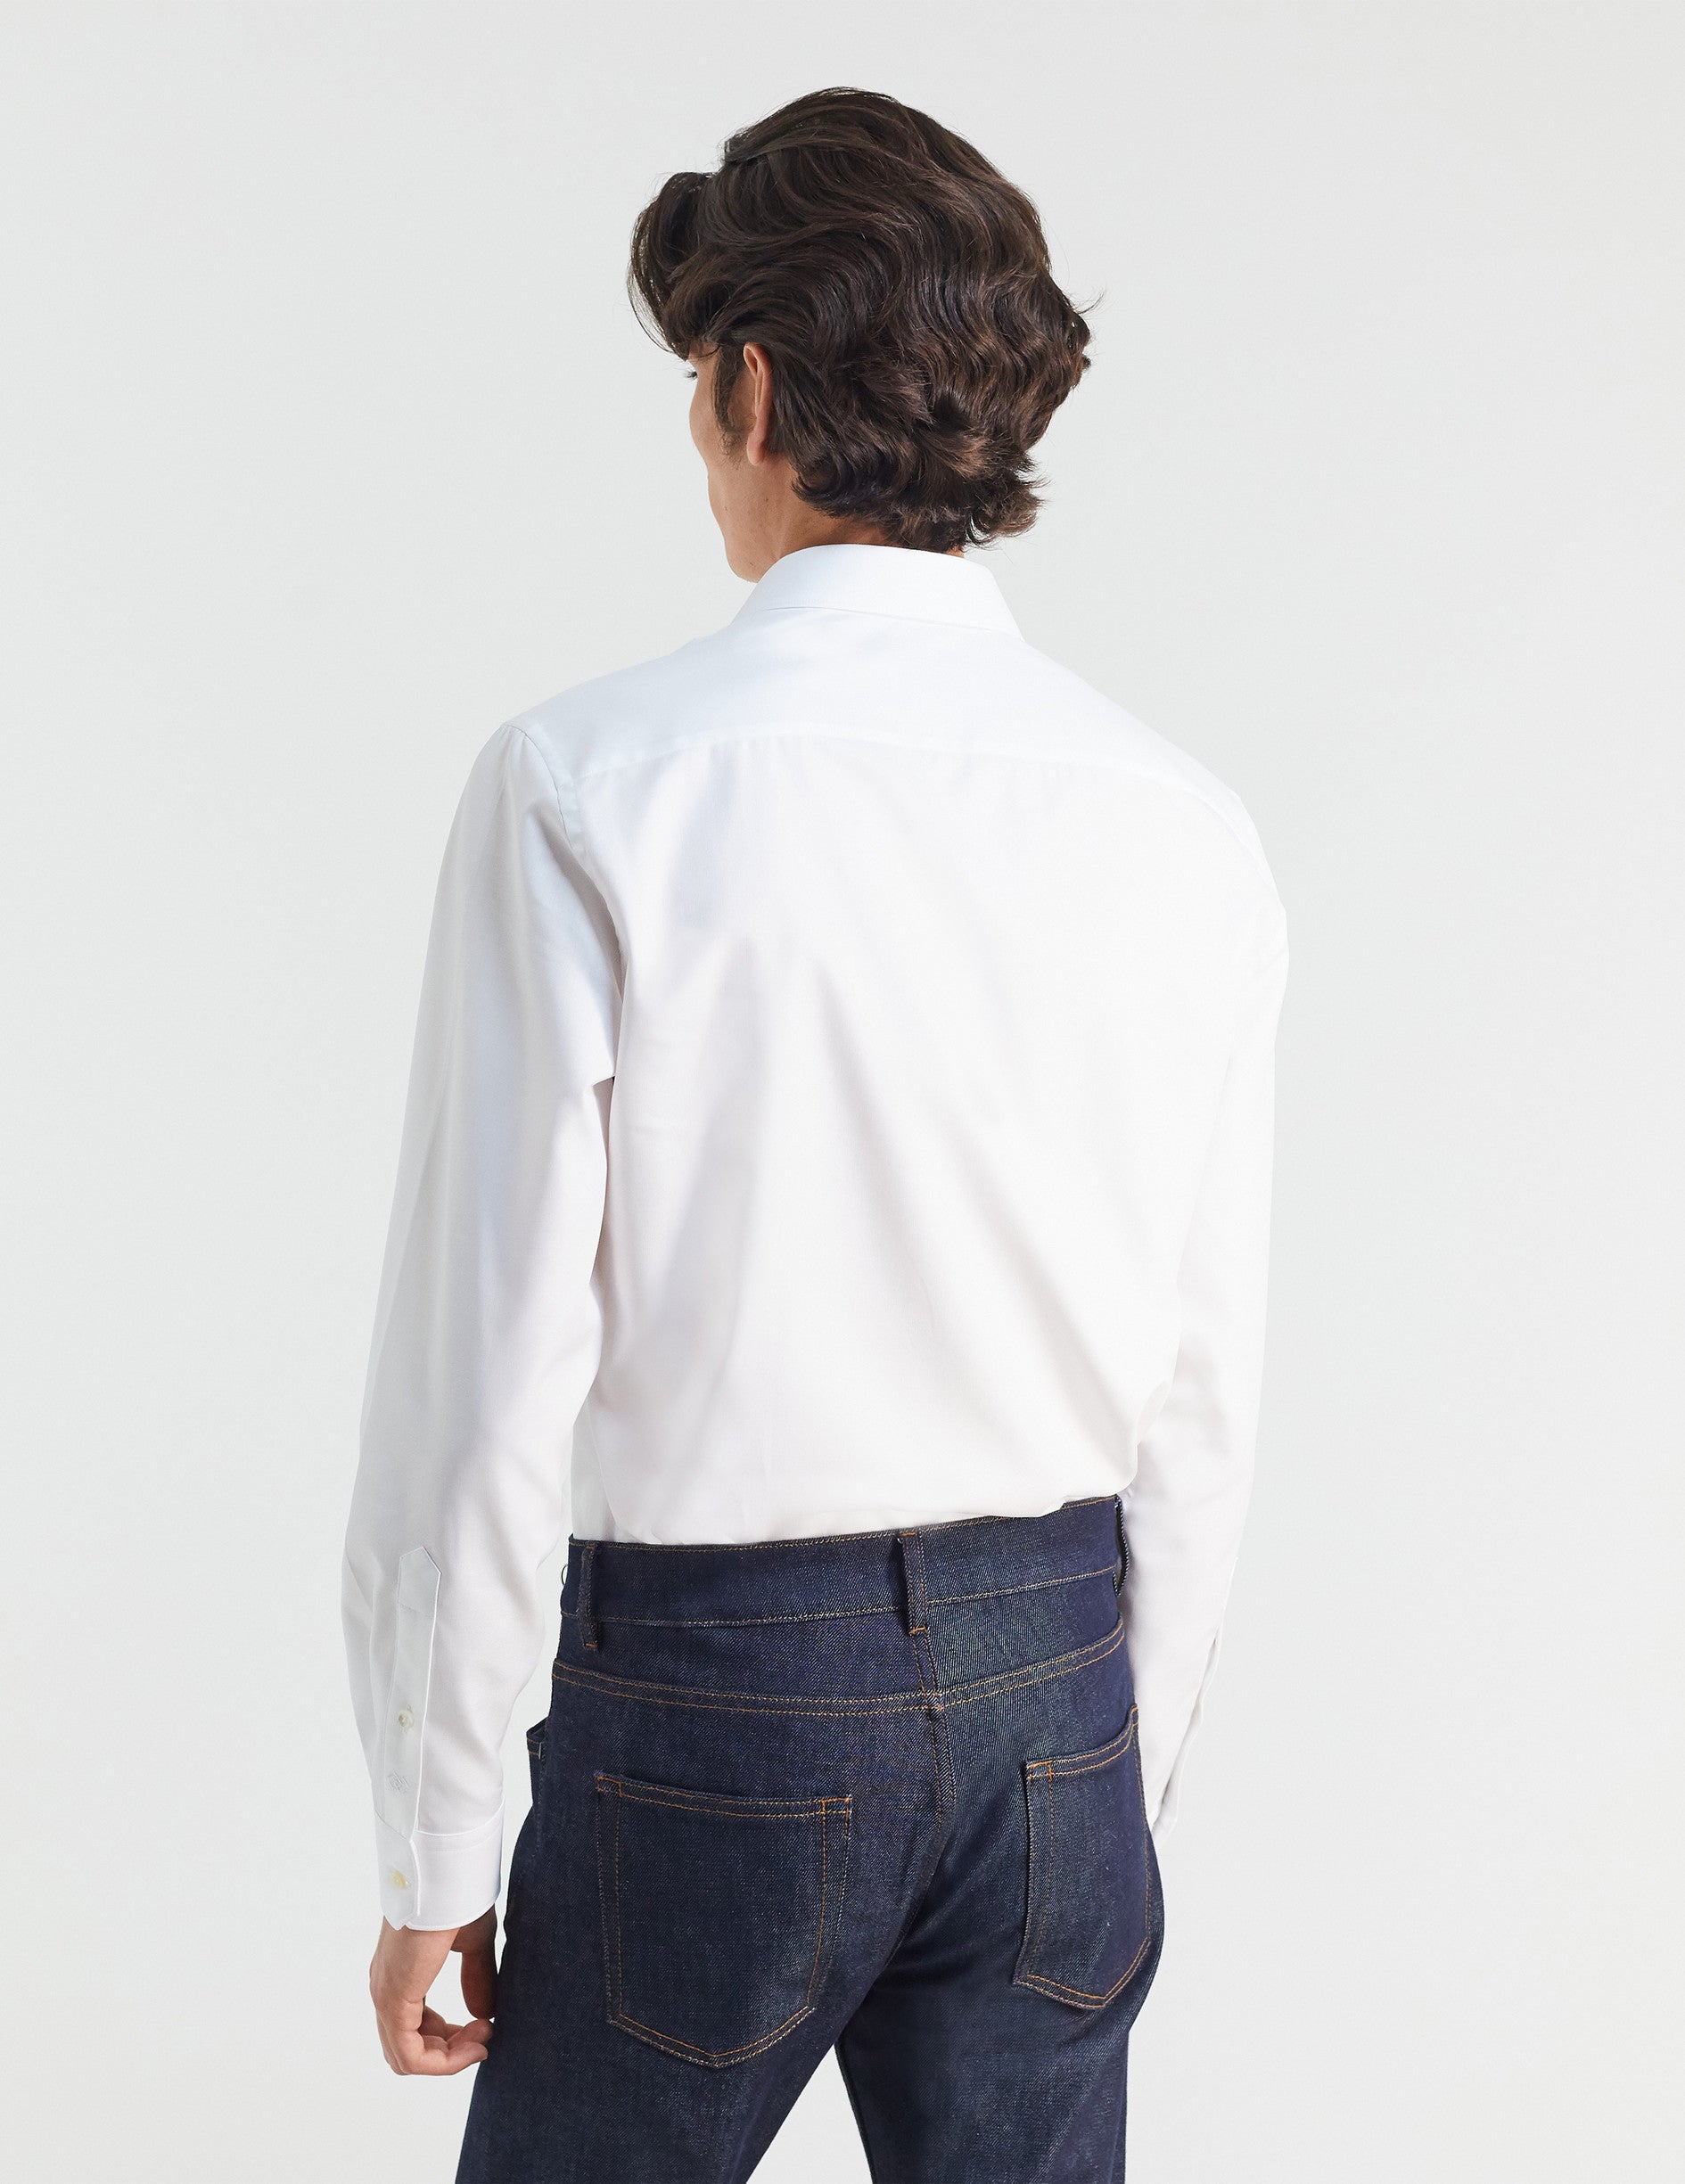 Fitted white shirt - fashioned - Figaret Collar